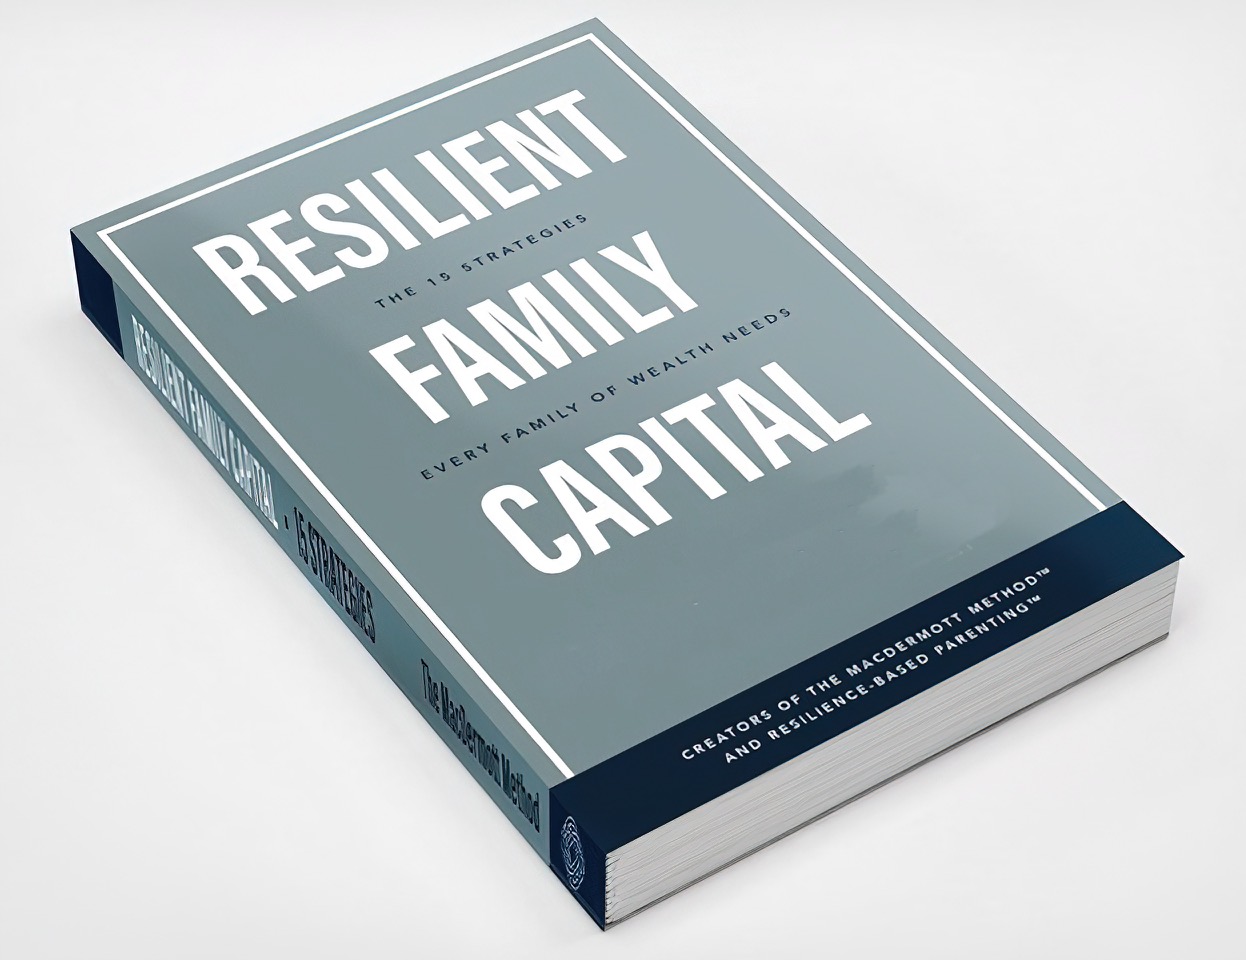  Resilient Family Capital